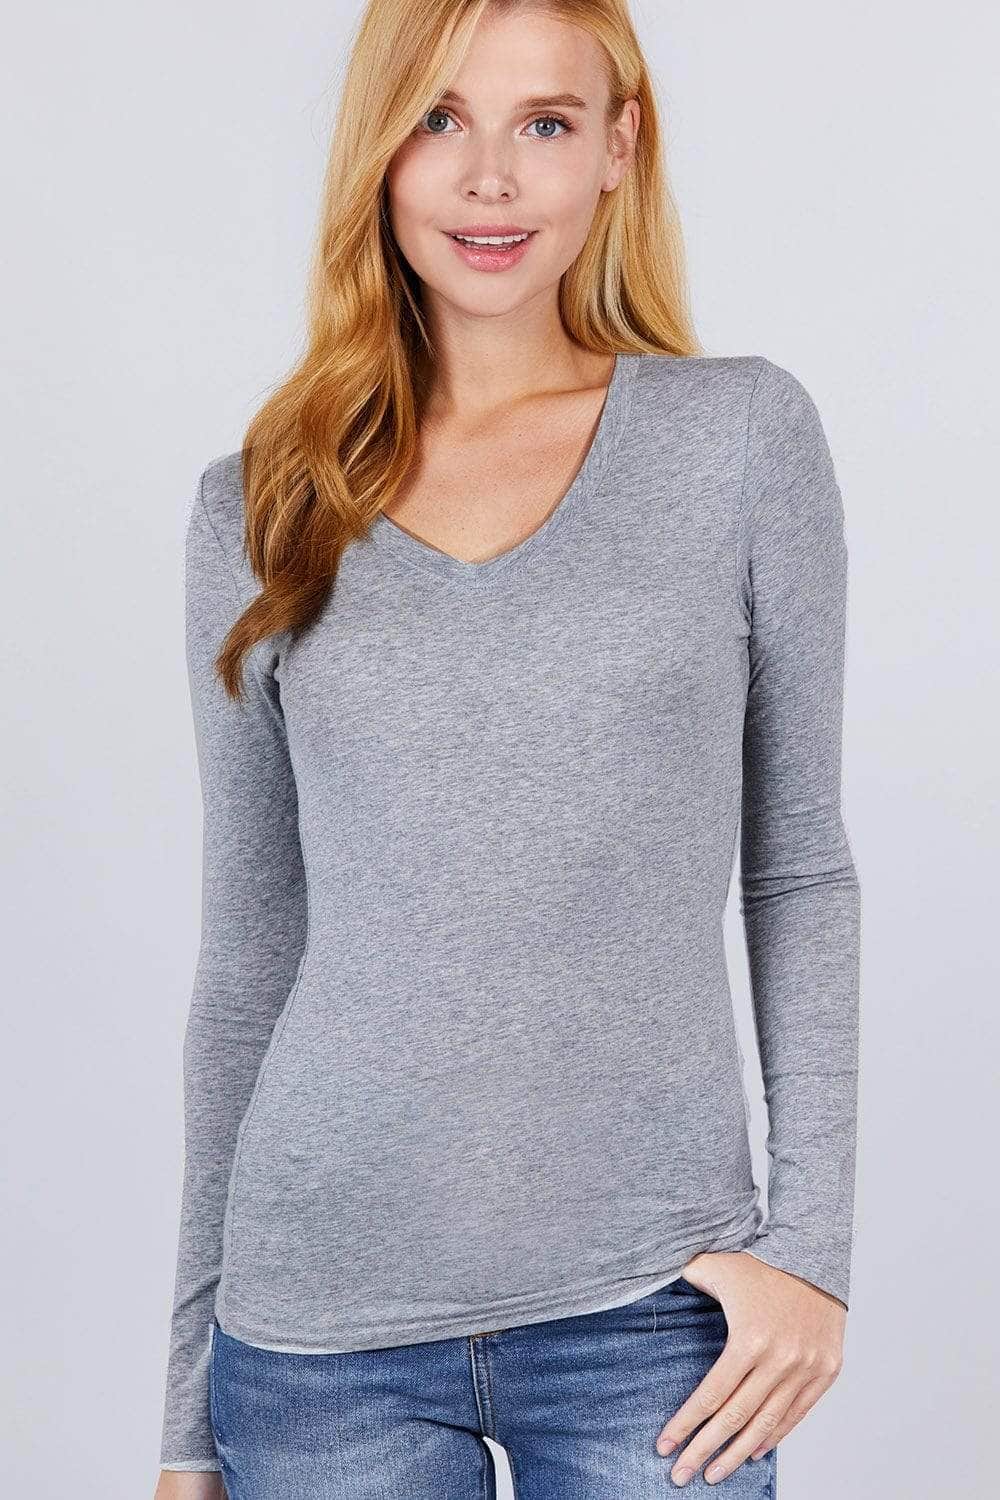 Cotton Jersey V-neck Top-TOPS / DRESSES-[Adult]-[Female]-Heather Grey-S-Blue Zone Planet